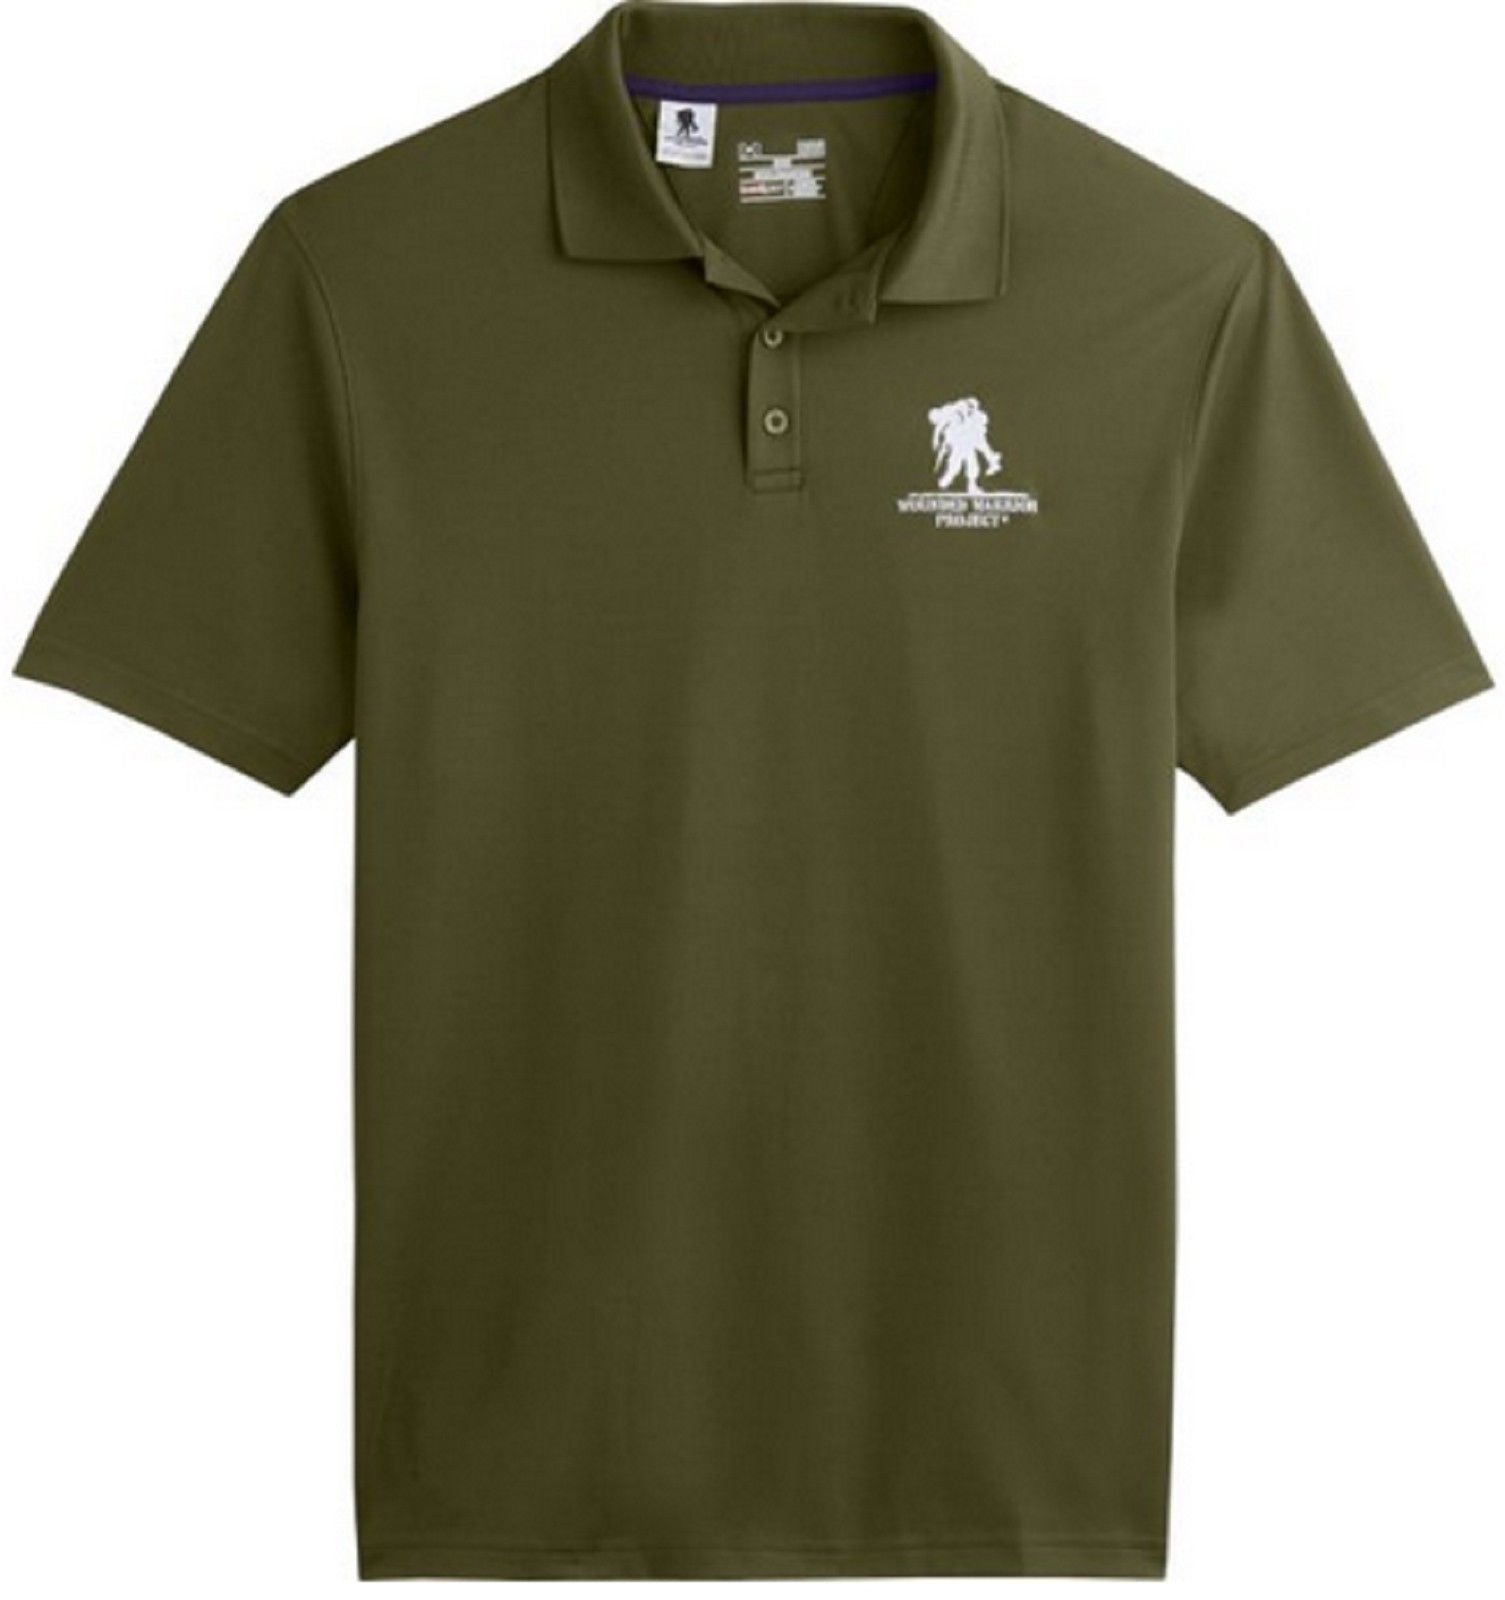 wounded warrior polo